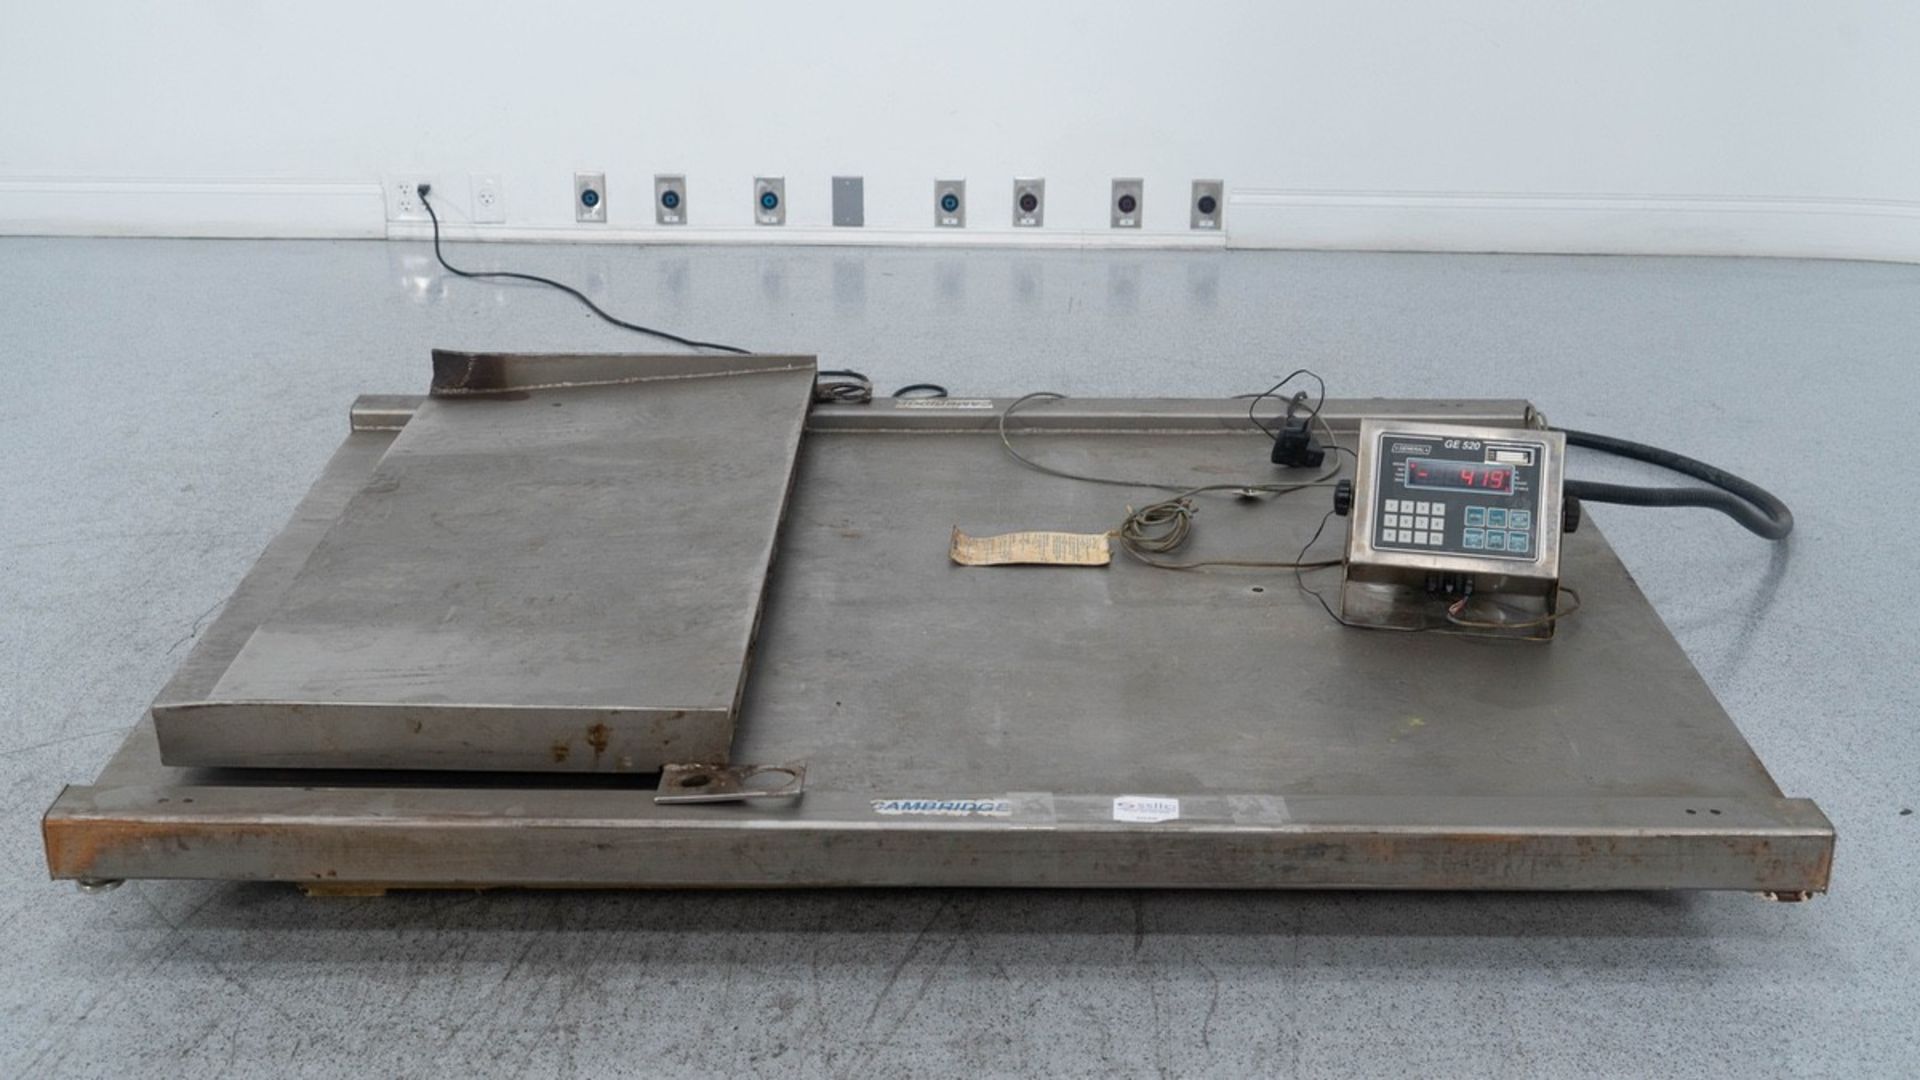 Cambridge Scale Works SS680 Floor Scale, Model S680, S/N: 99-6135, Max Capacity: 50 | Rig Fee: $25